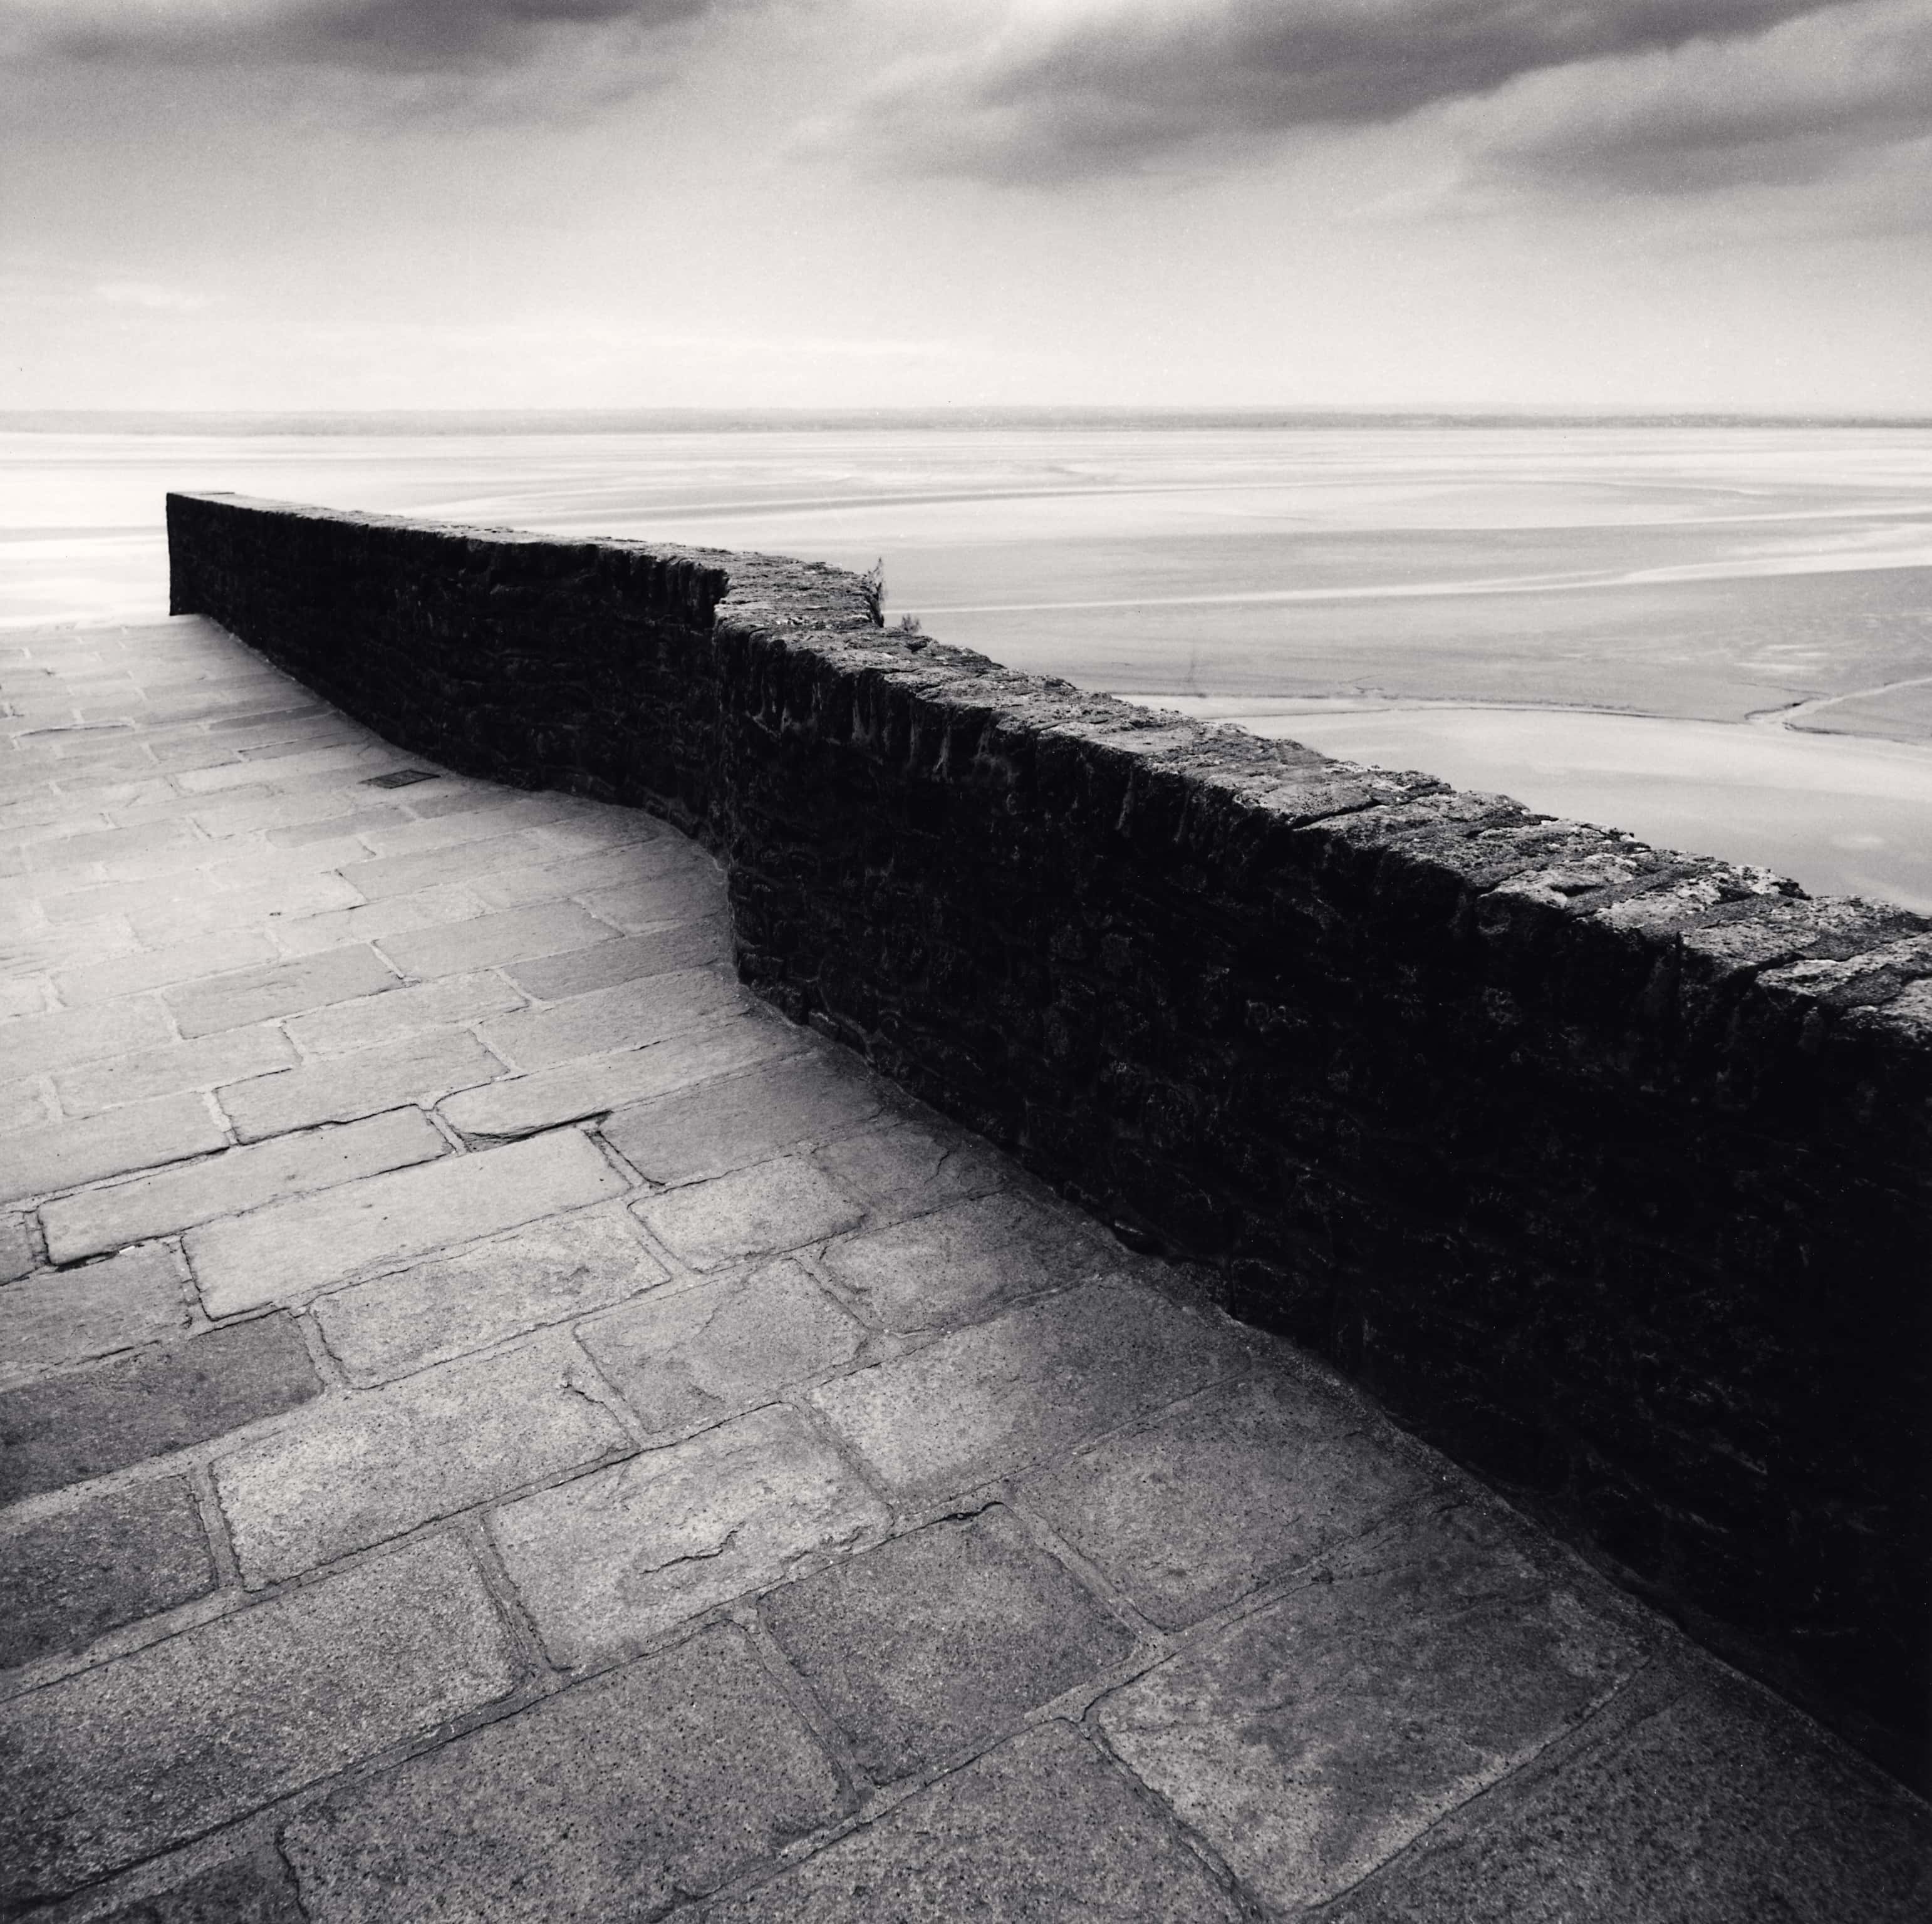 Winding Wall, Mont St. Michel, France, 2004 Michael Kenna